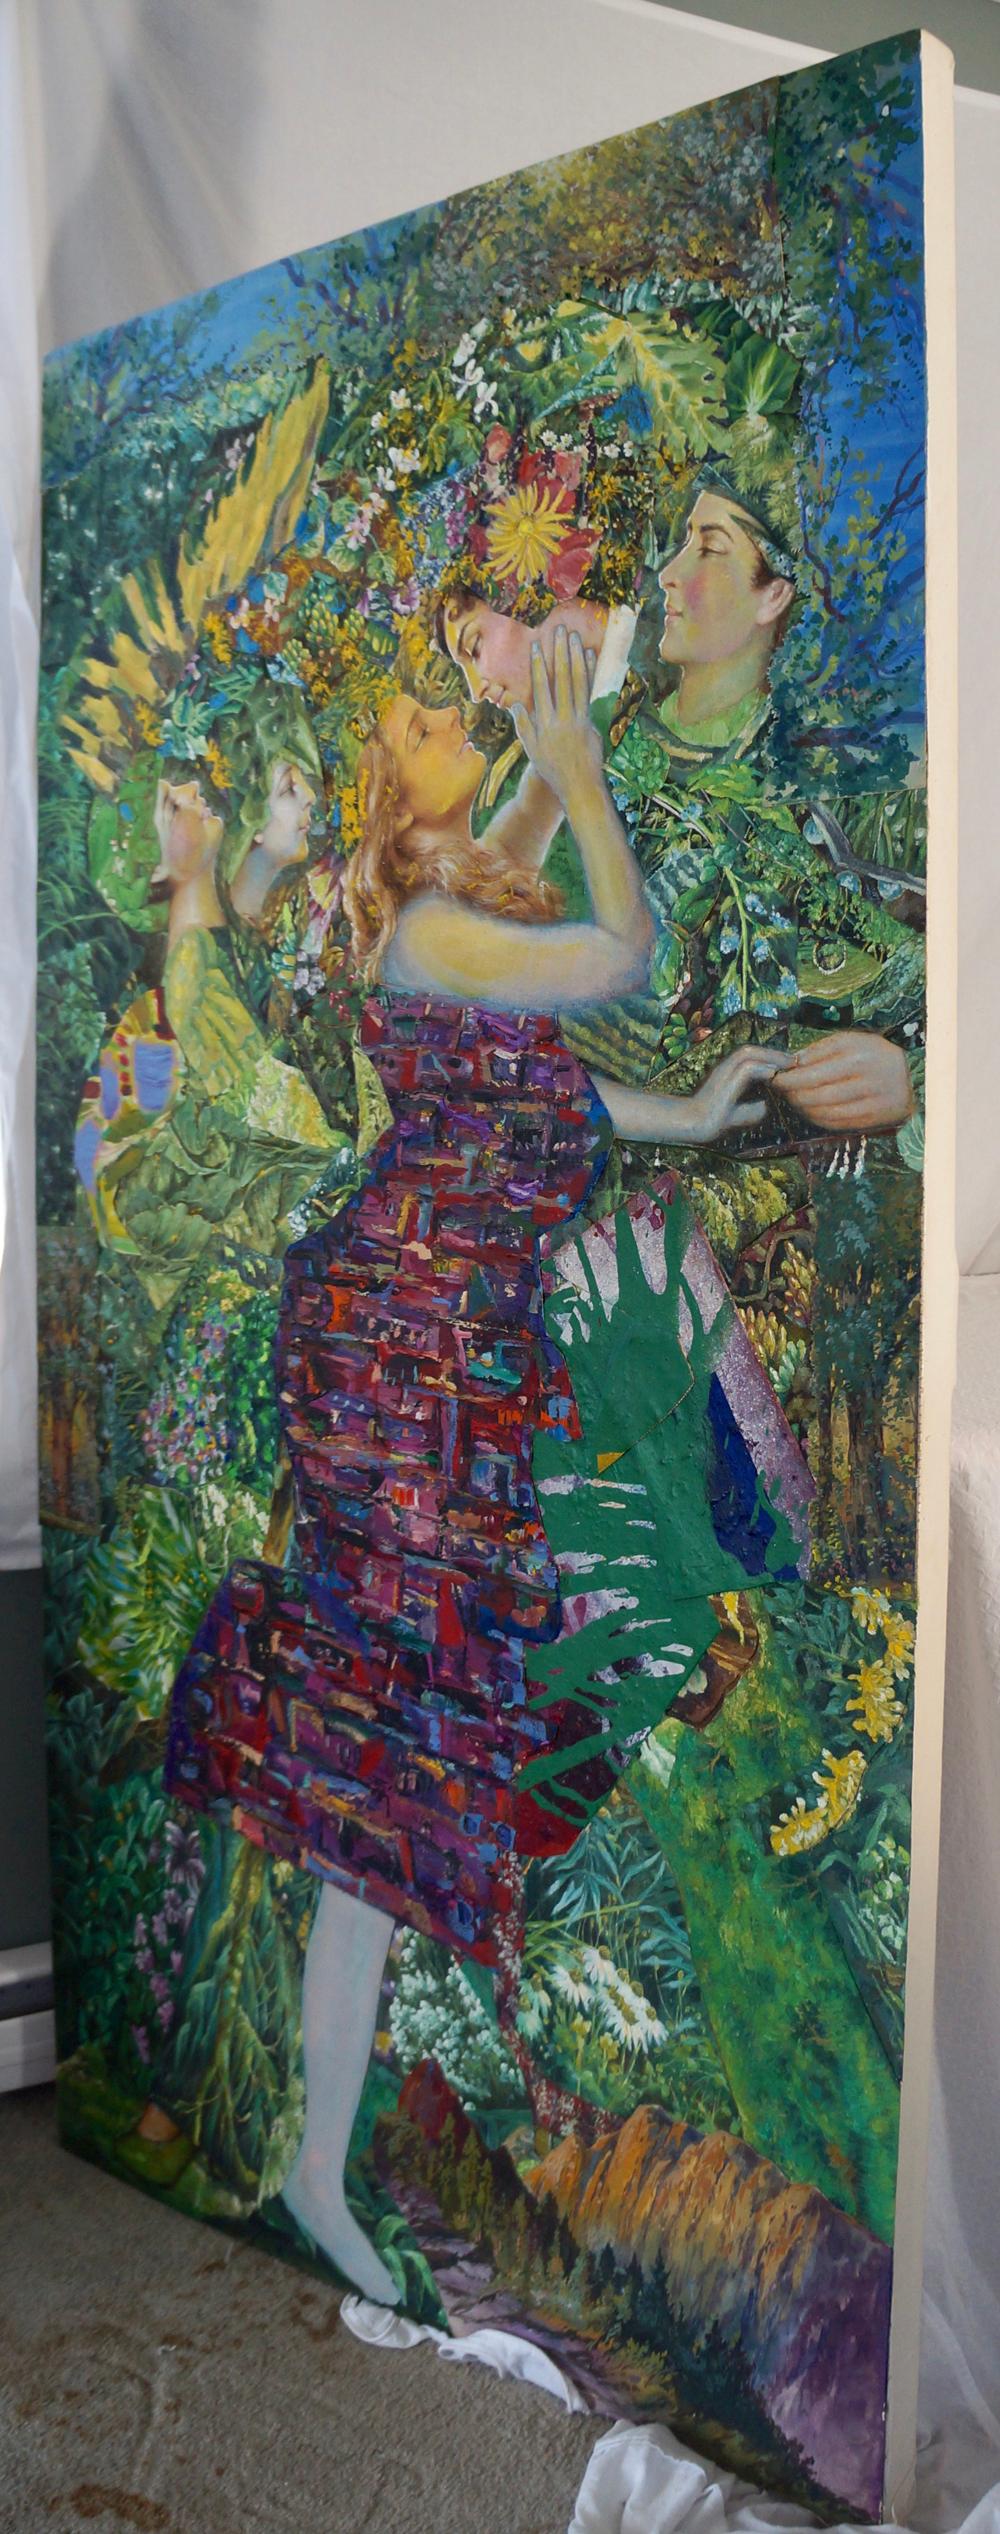 John Baker’s “Tiptoe Kiss” is a 64 x 35 x 1.5 inch acrylic painting with collage on canvas in intense reds, greens and yellows of a young couple about to kiss in a forest. The central woman’s face is a solar radiance that casts its sunlight on the